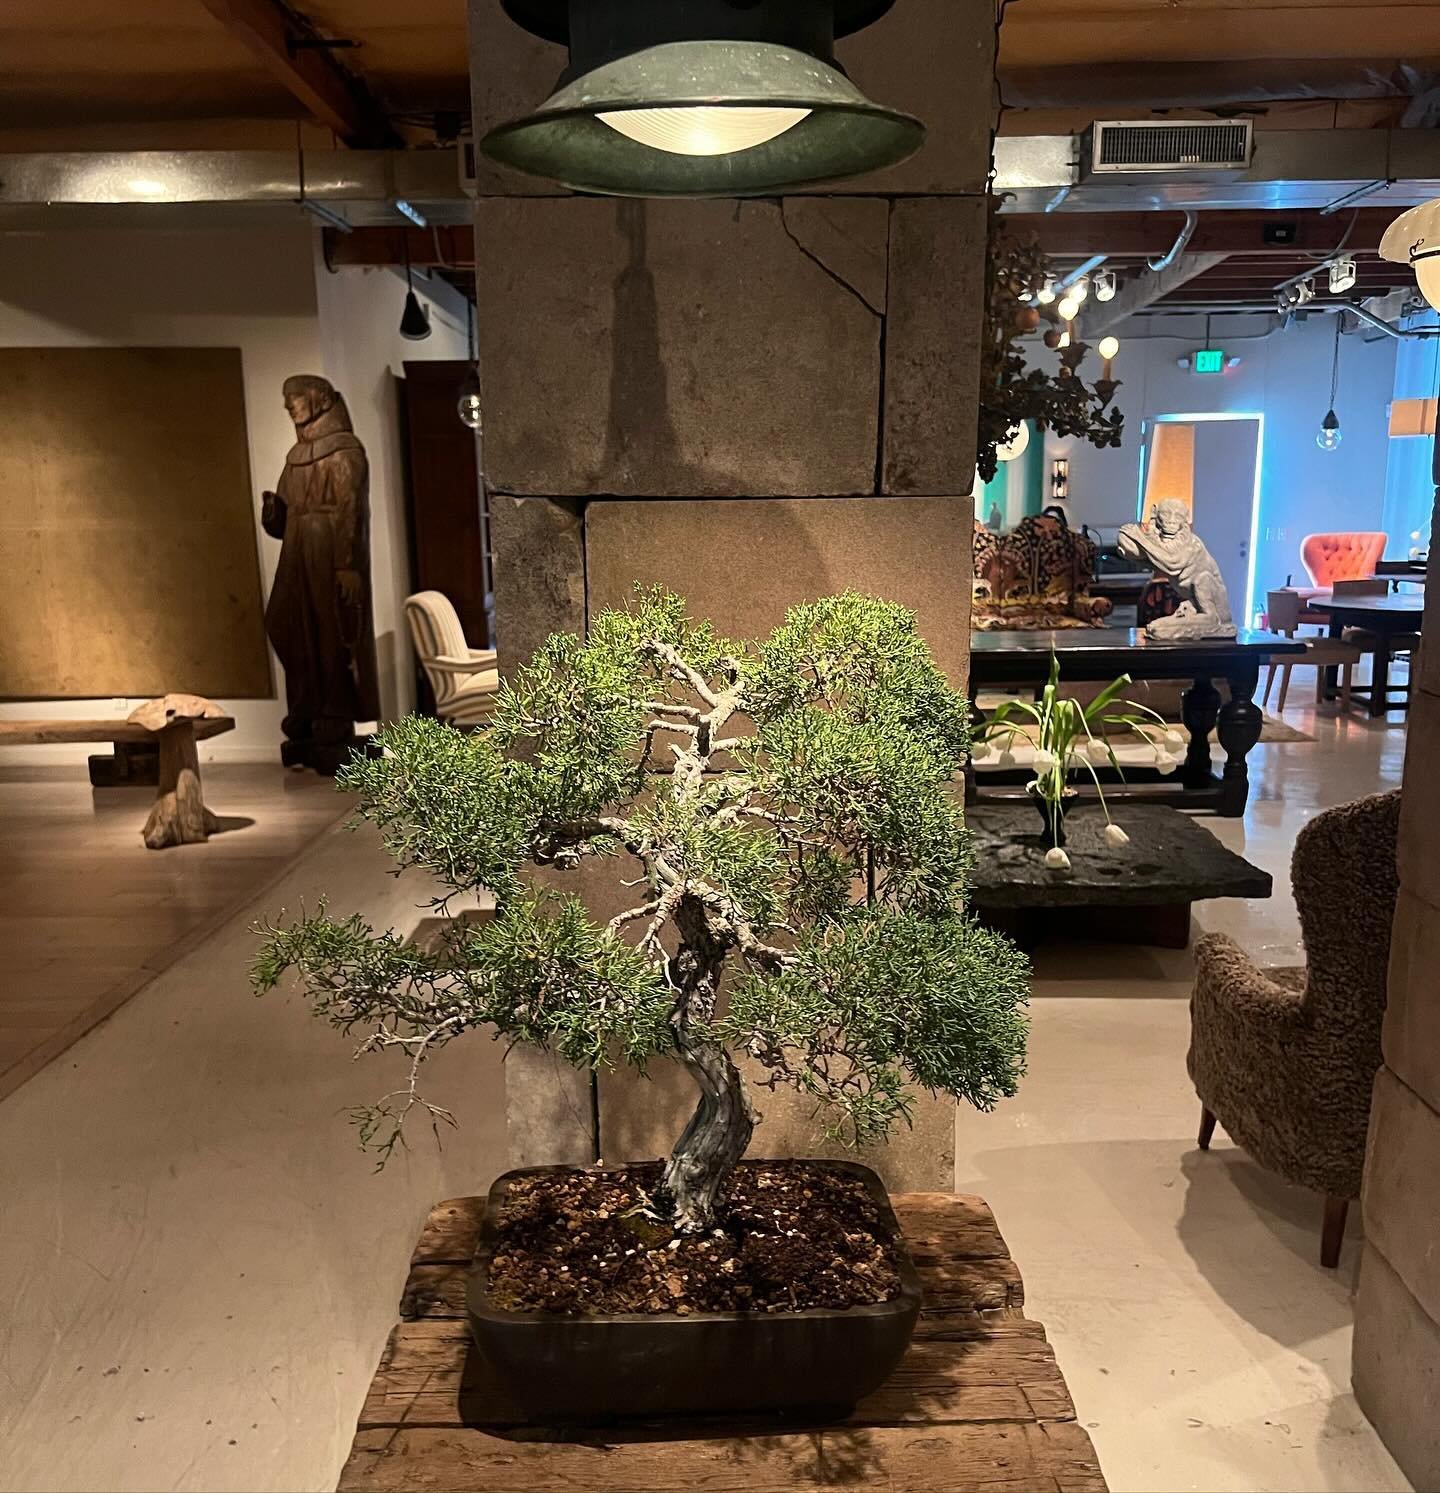 @obsoleteinc ❤️ Neighborhood spotlight! Inspired by my clients zen garden at 3785 Boise Ave in Mar Vista. I decided to go see the #bonsai collection at Obsolete in Culver City, just steps from Mar Vista. Such a surreal and beautiful place to shop for